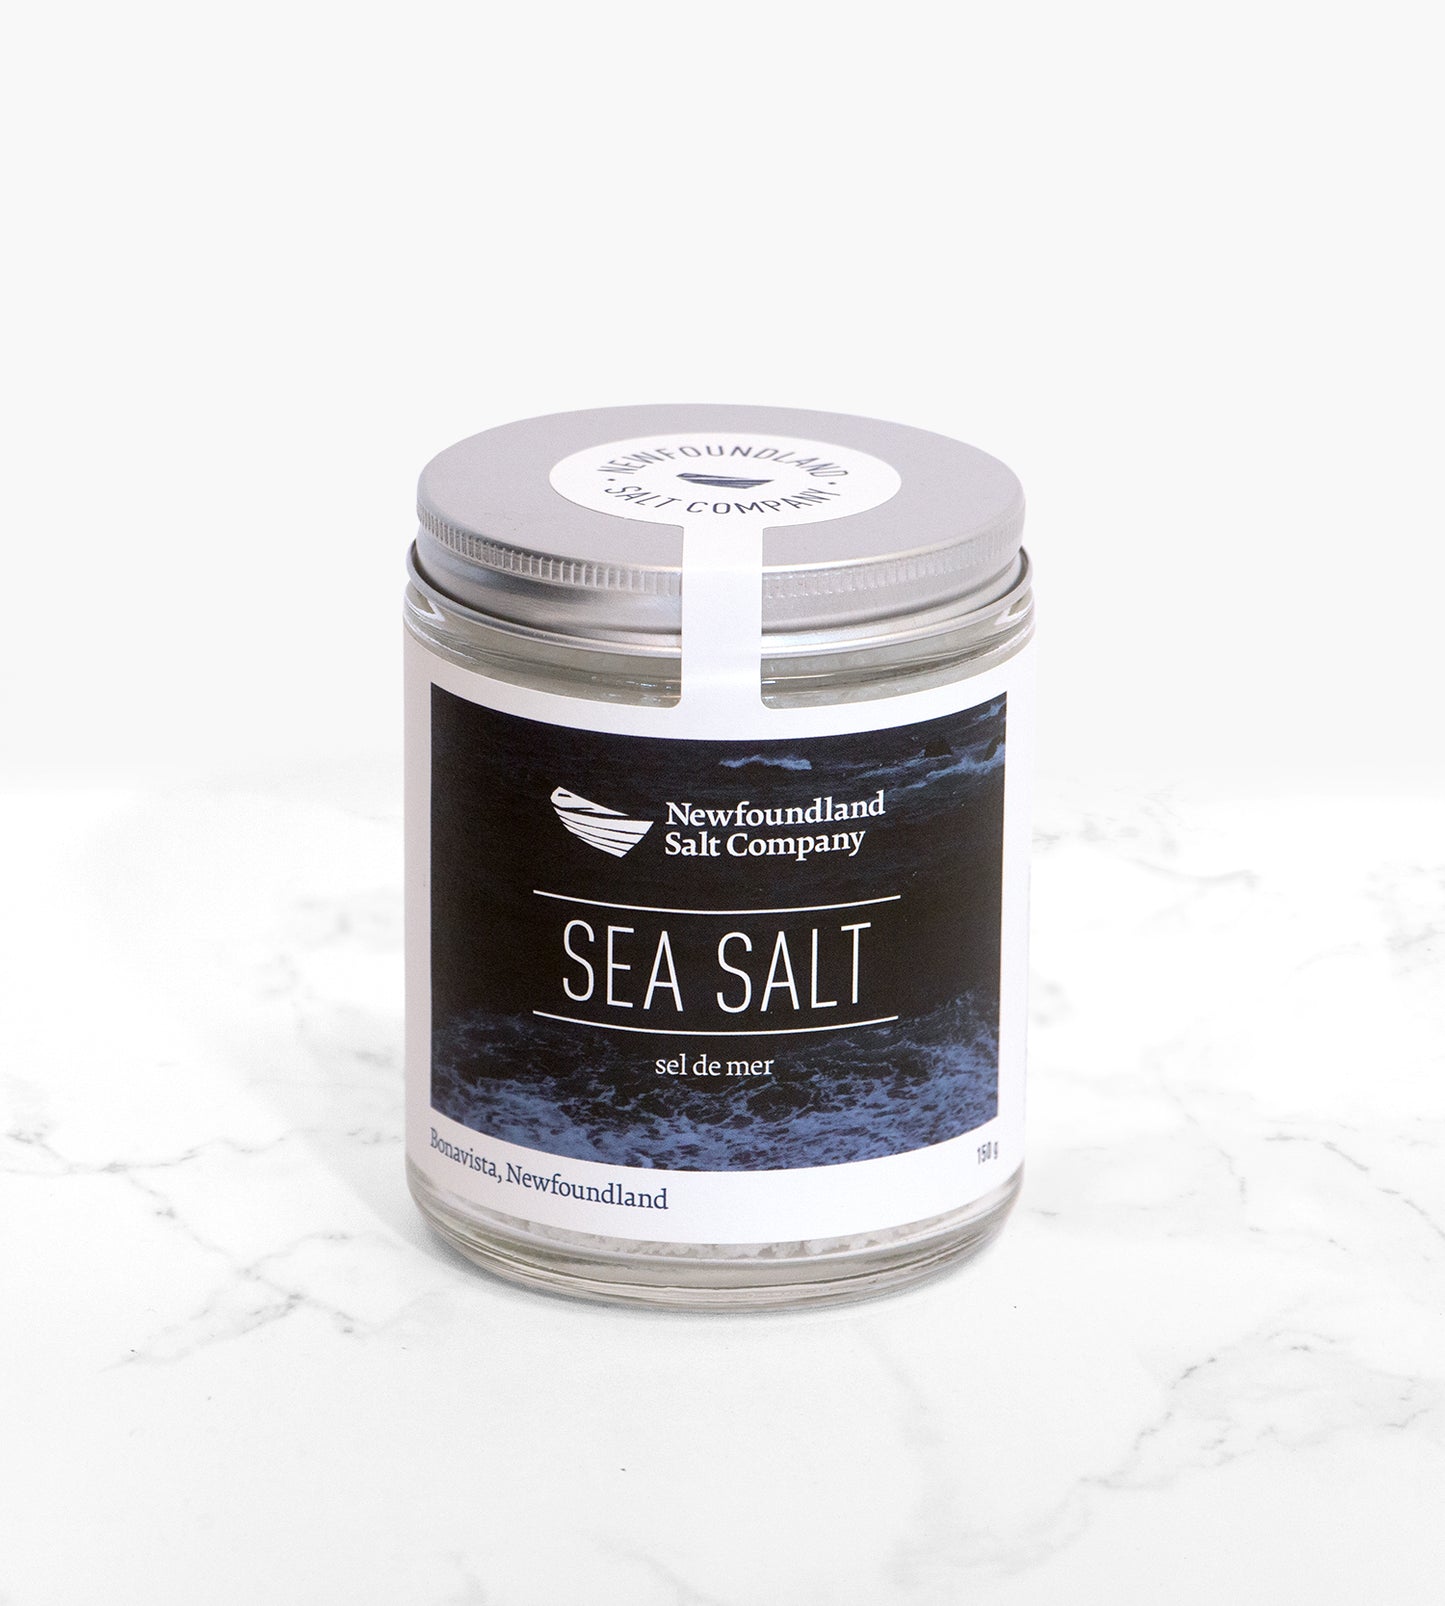 A cylindrical glass jar of sea salt flakes, with a silver lid, sits on a white marble tile. The label on the jar features a dark blue ocean wave photo.